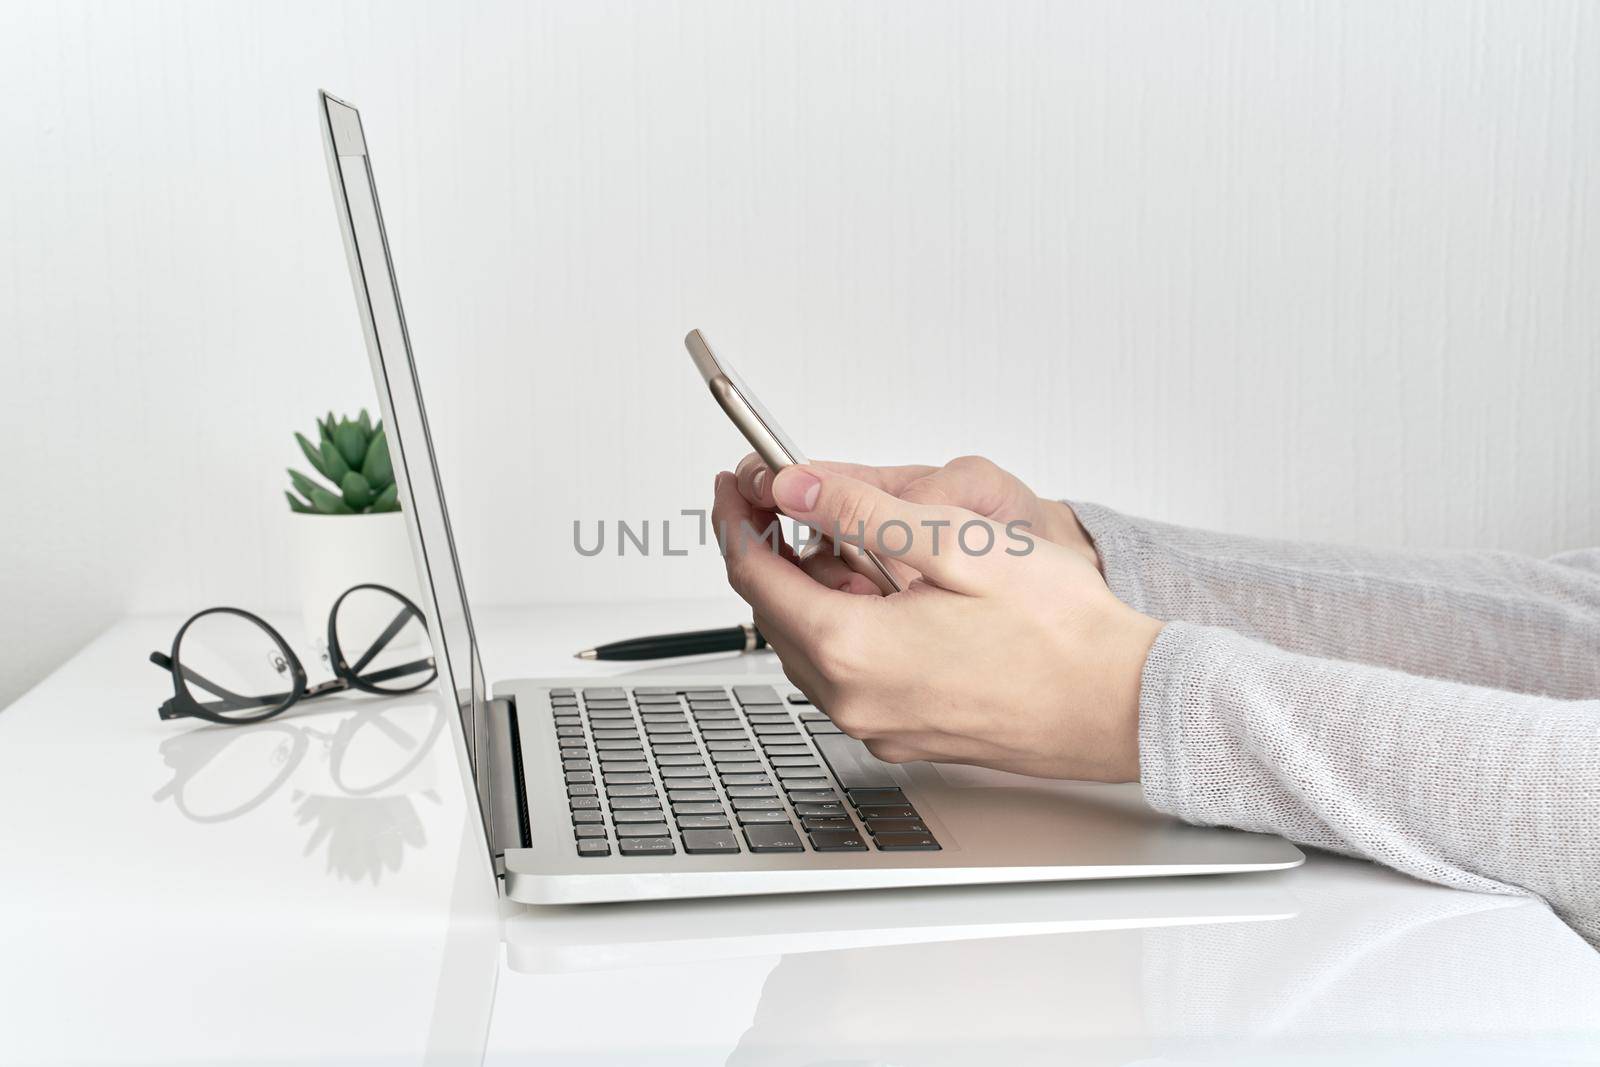 Unrecognizable woman using smartphone while typing on laptop, concept of password entry by NataBene